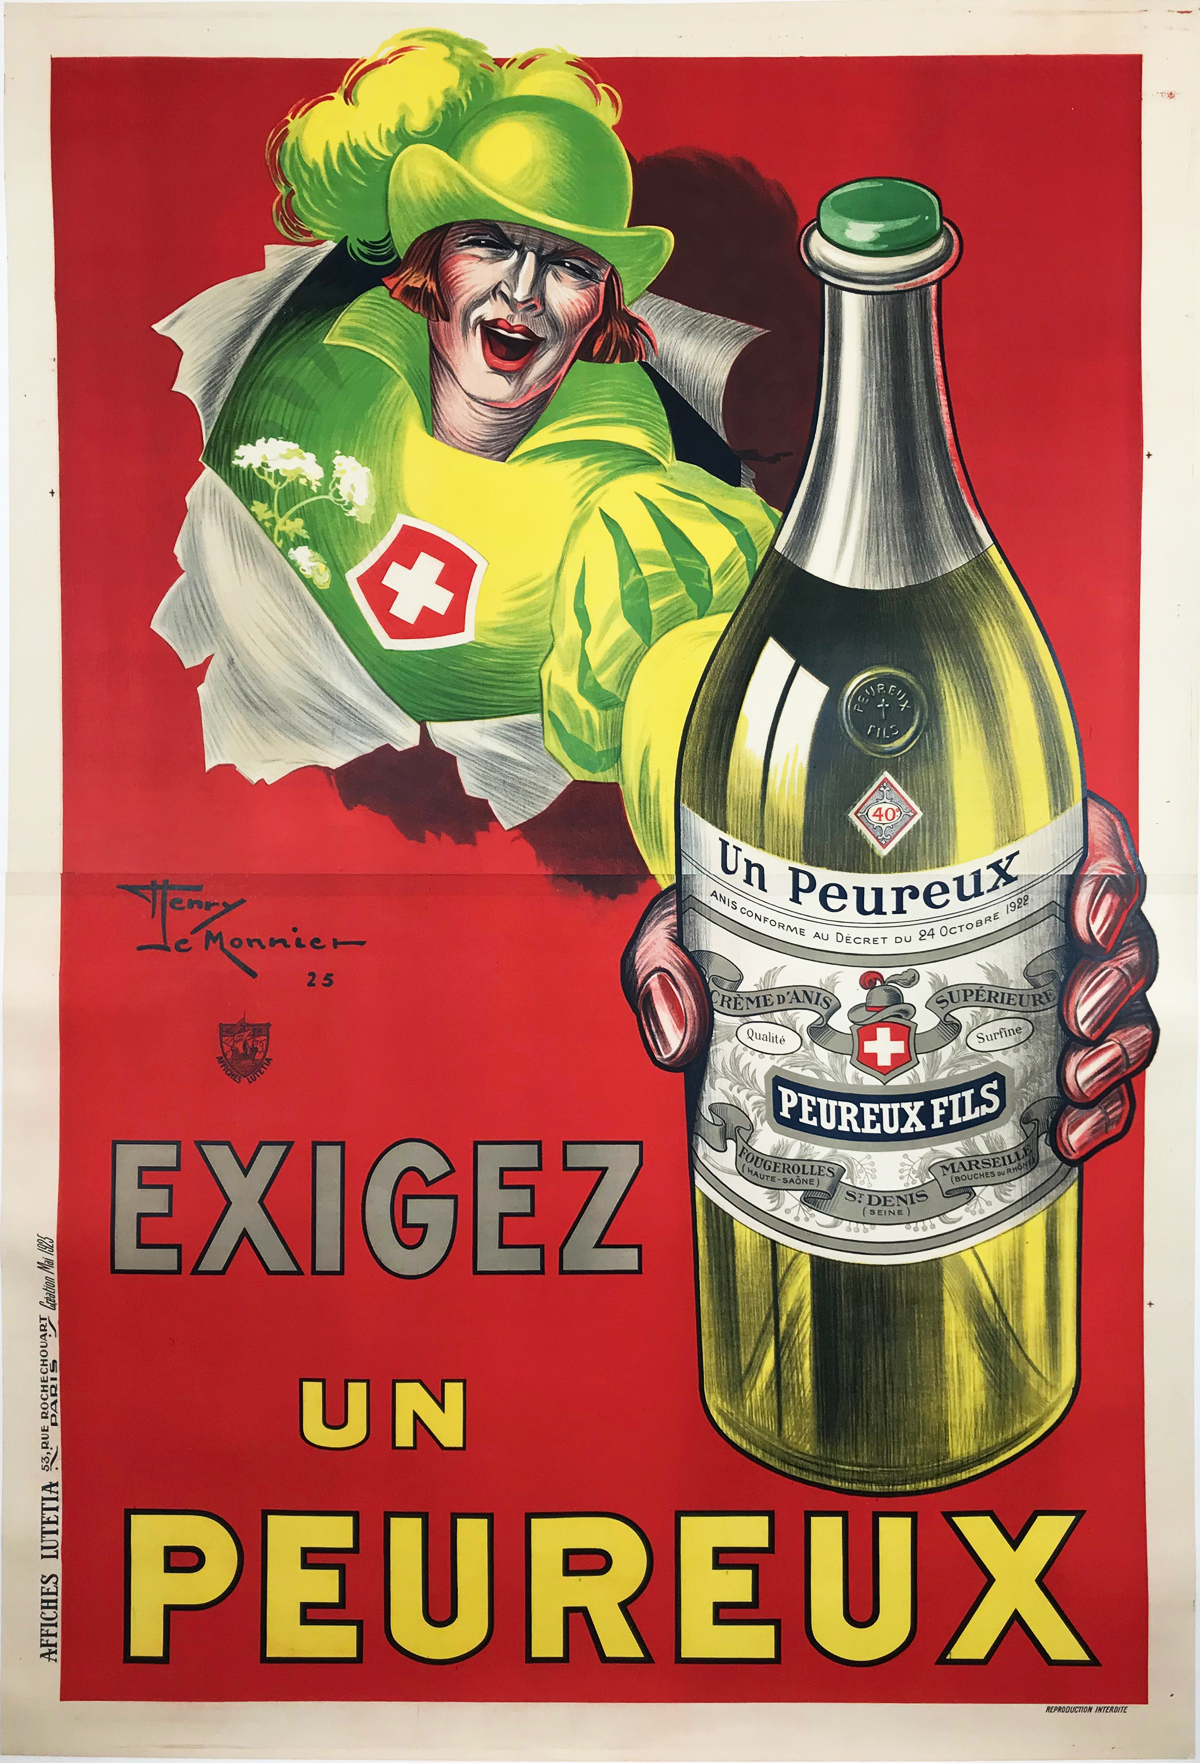 Exigez un Peureux by H. Le Monnier Original 1925 Vintage French 2 Sheet Liquer Advertisement Poster Linen Backed. French wine and spirits poster features a swiss guard in green breaking through the red background holding out a bottle. 